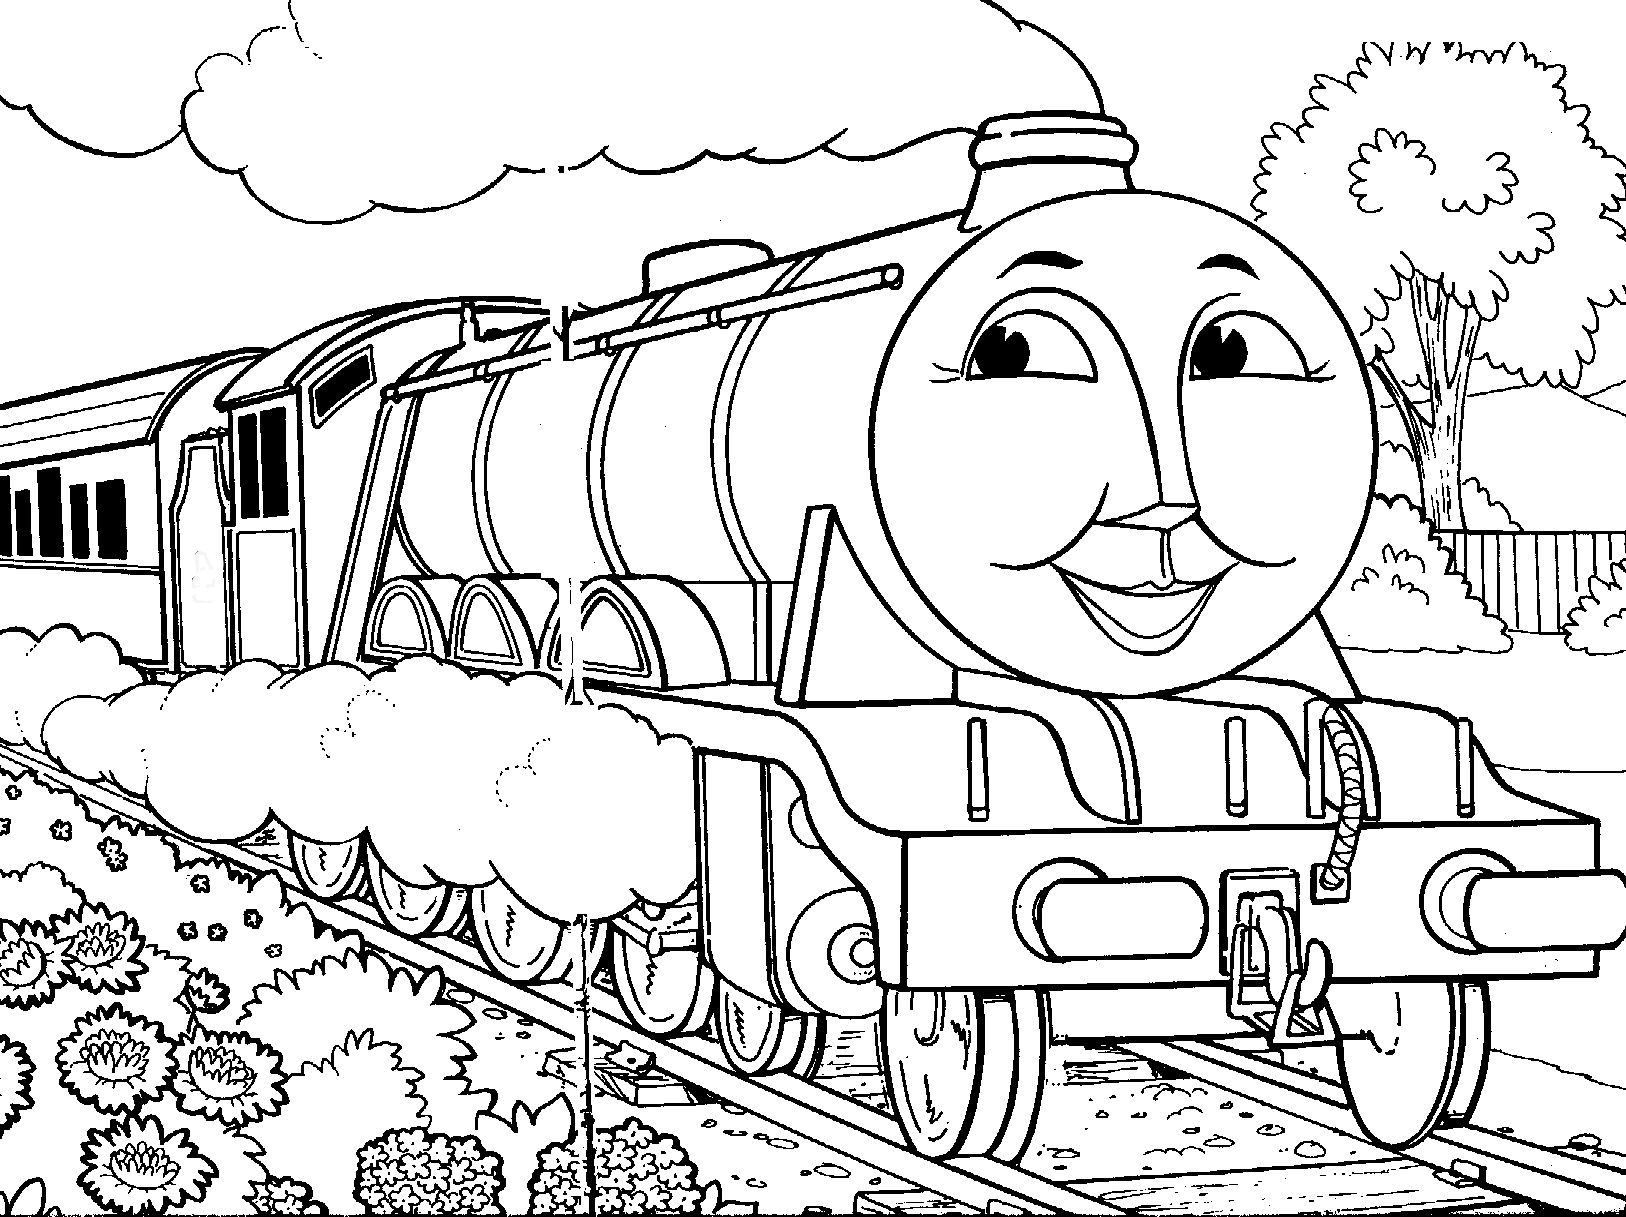 Thomas The Train Halloween Coloring Pages At GetColorings Free Printable Colorings Pages